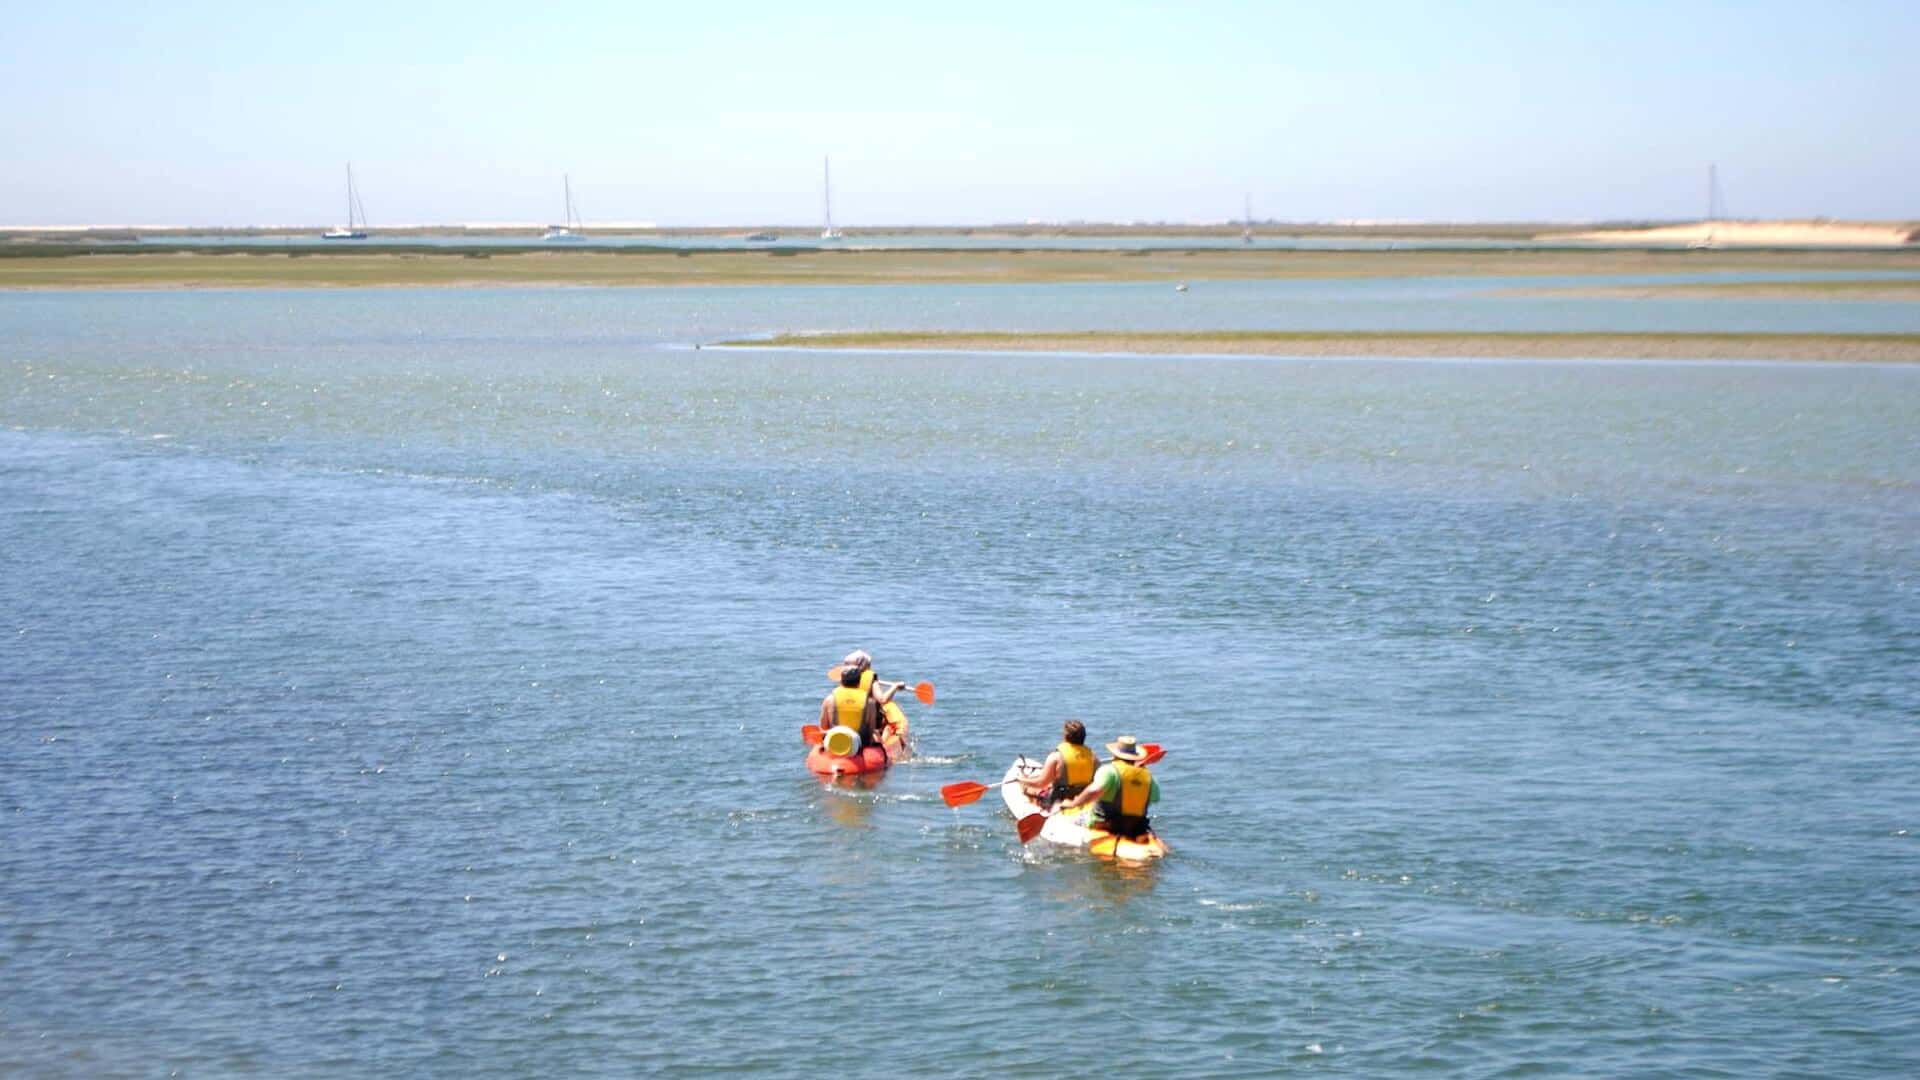 Explore the channels of Ria Formosa on our kayak tours around Faro